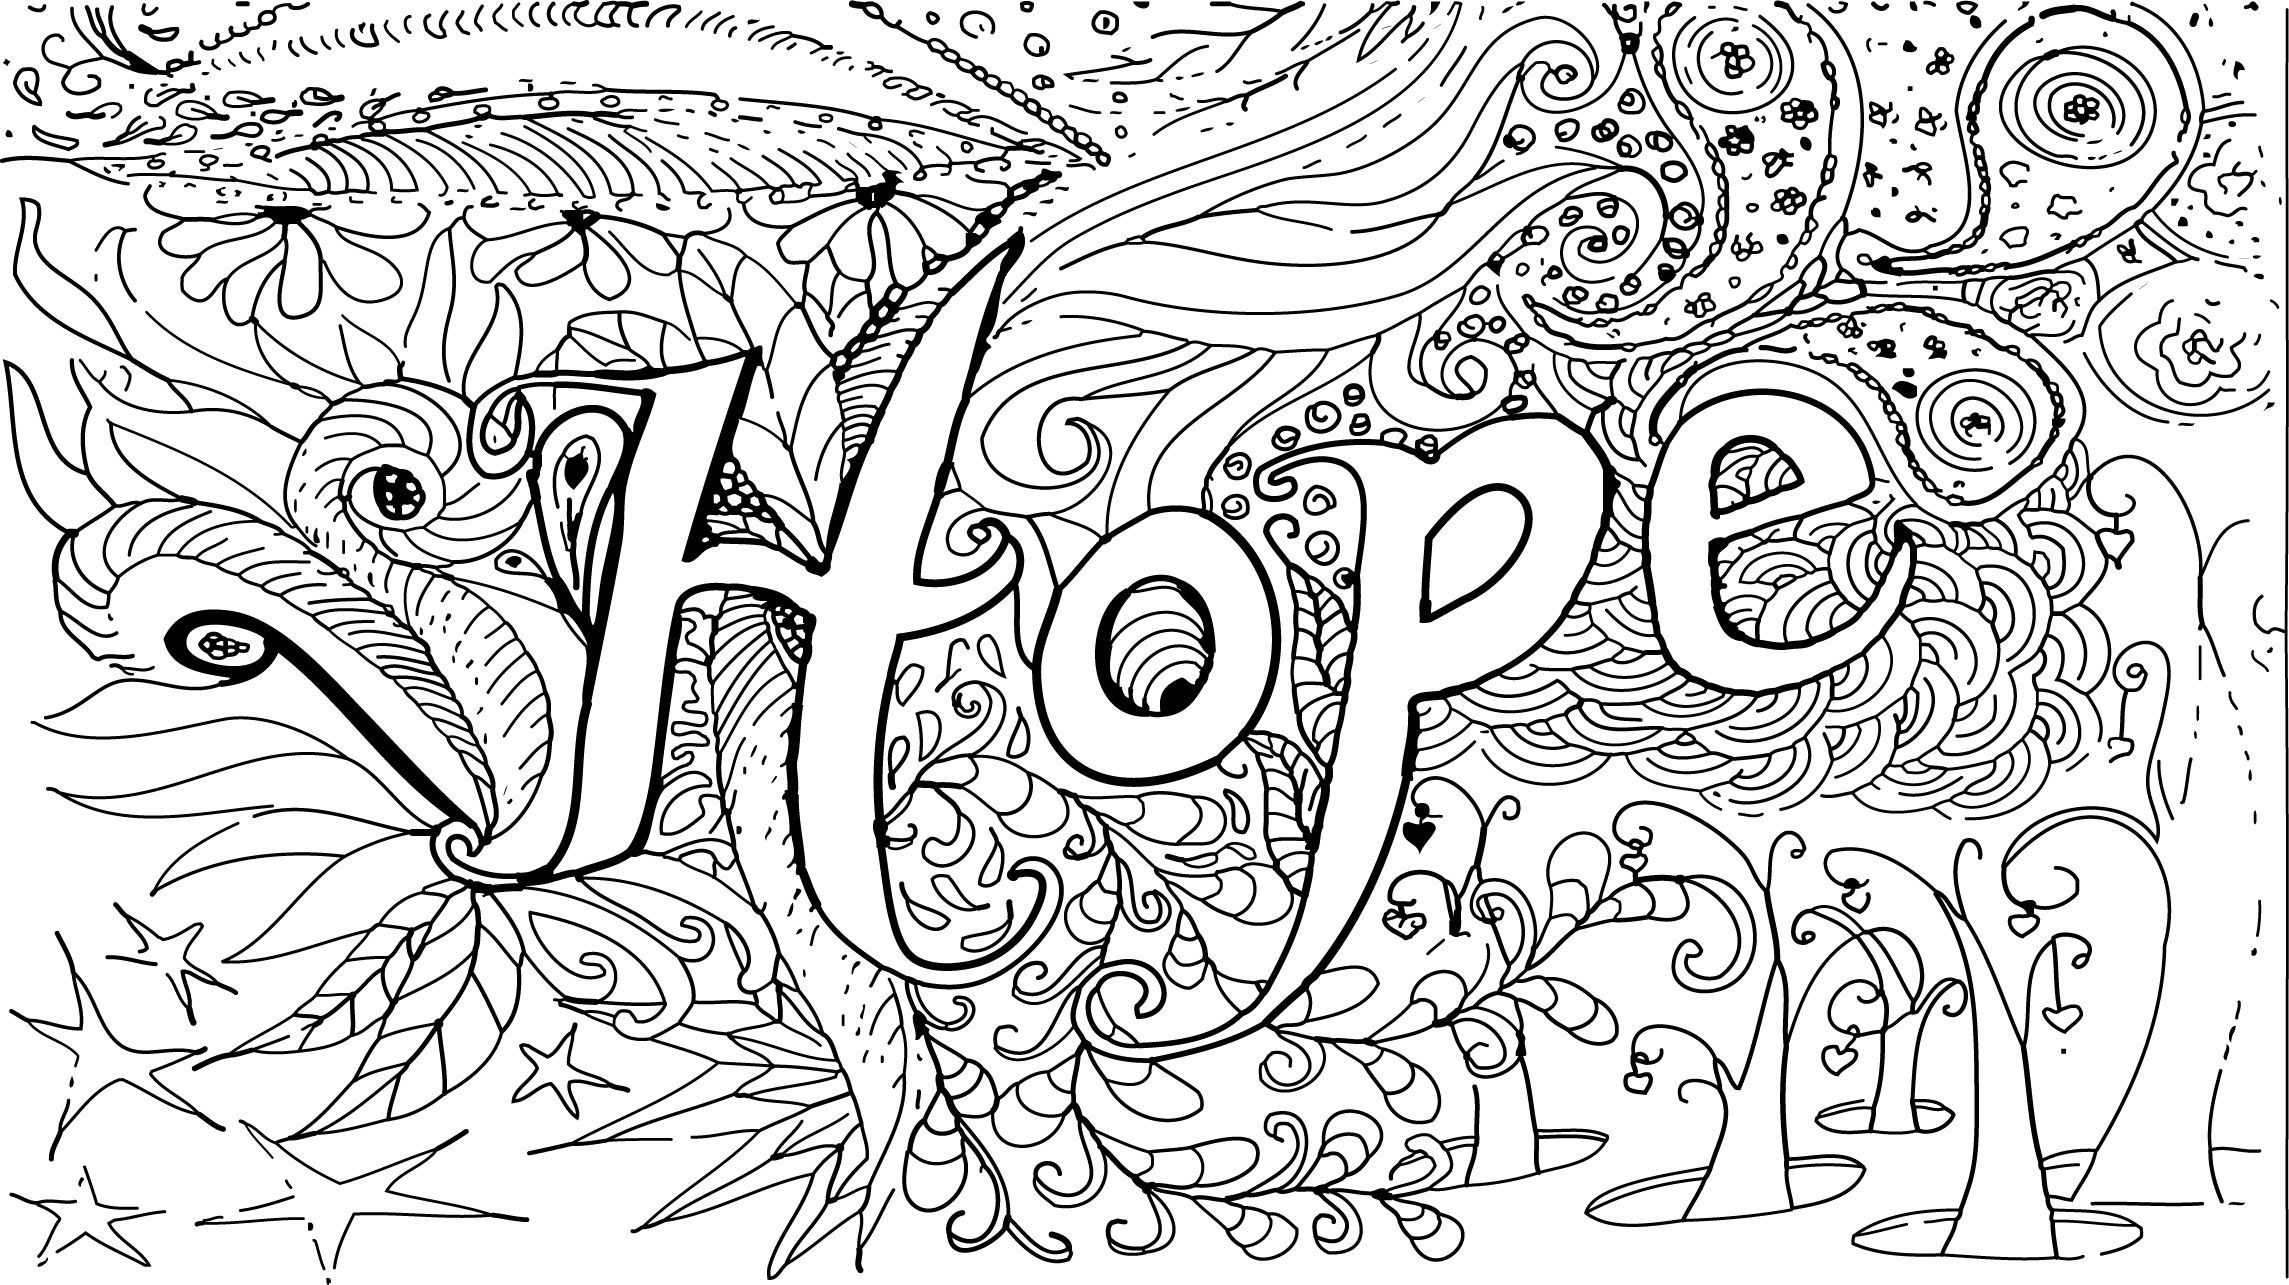 Hard Kids Coloring Pages
 hard coloring page hope inspiration coloring book free